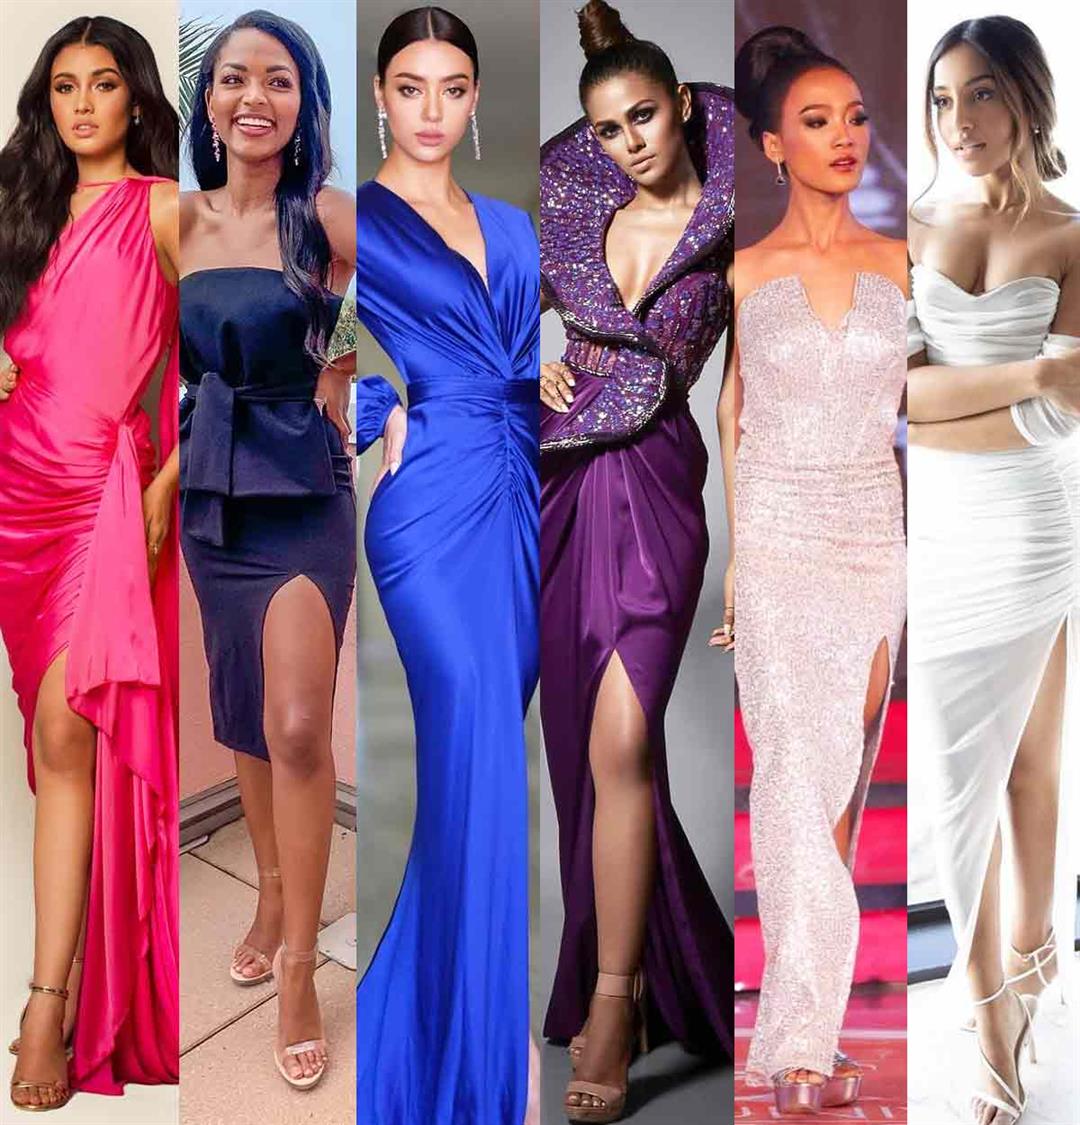 Does height matter at Miss Universe?